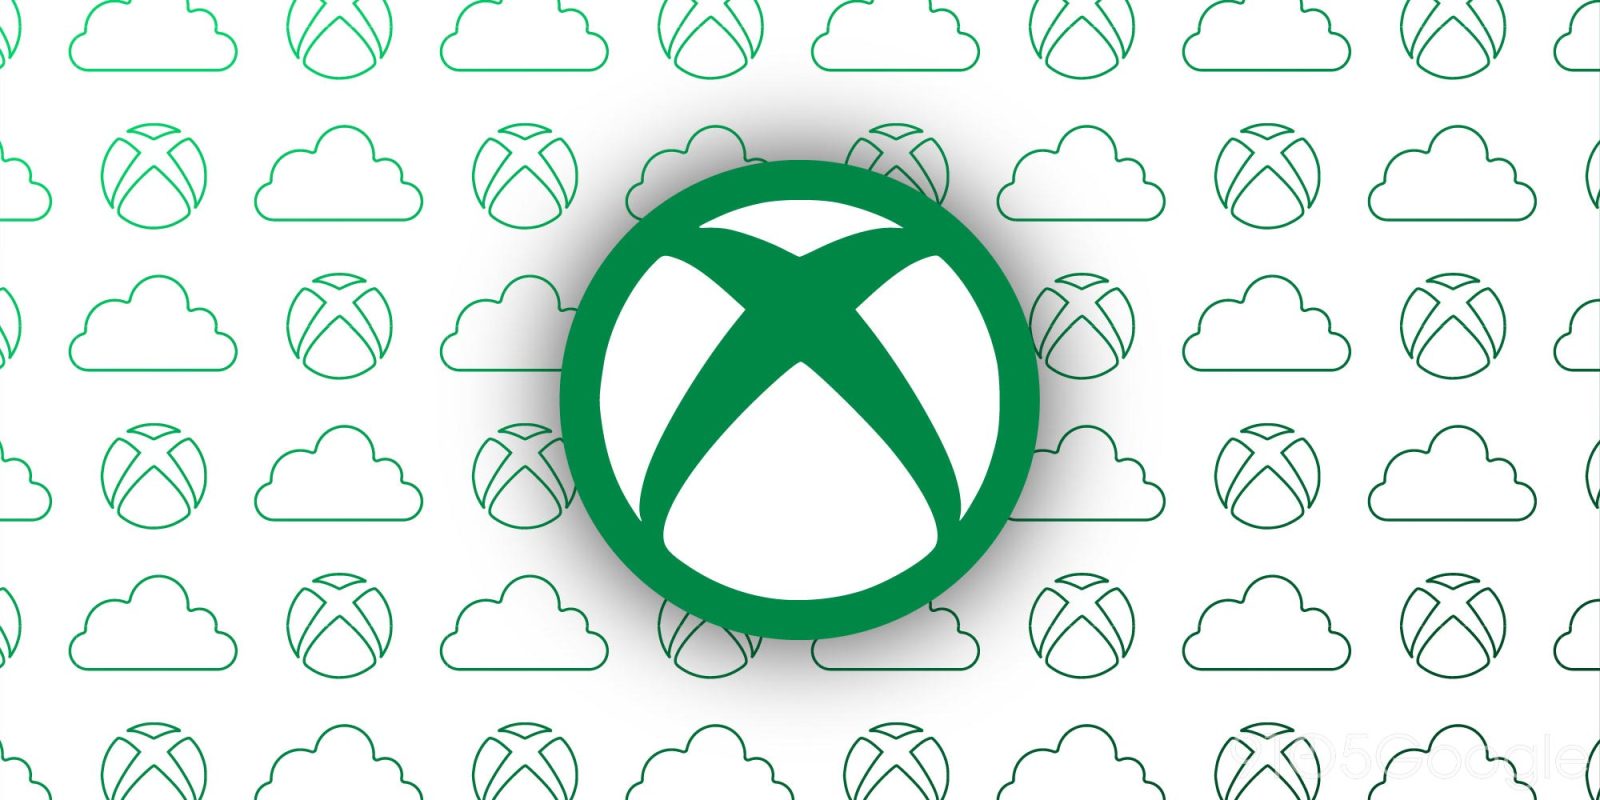 Xbox Cloud Gaming has come to PC